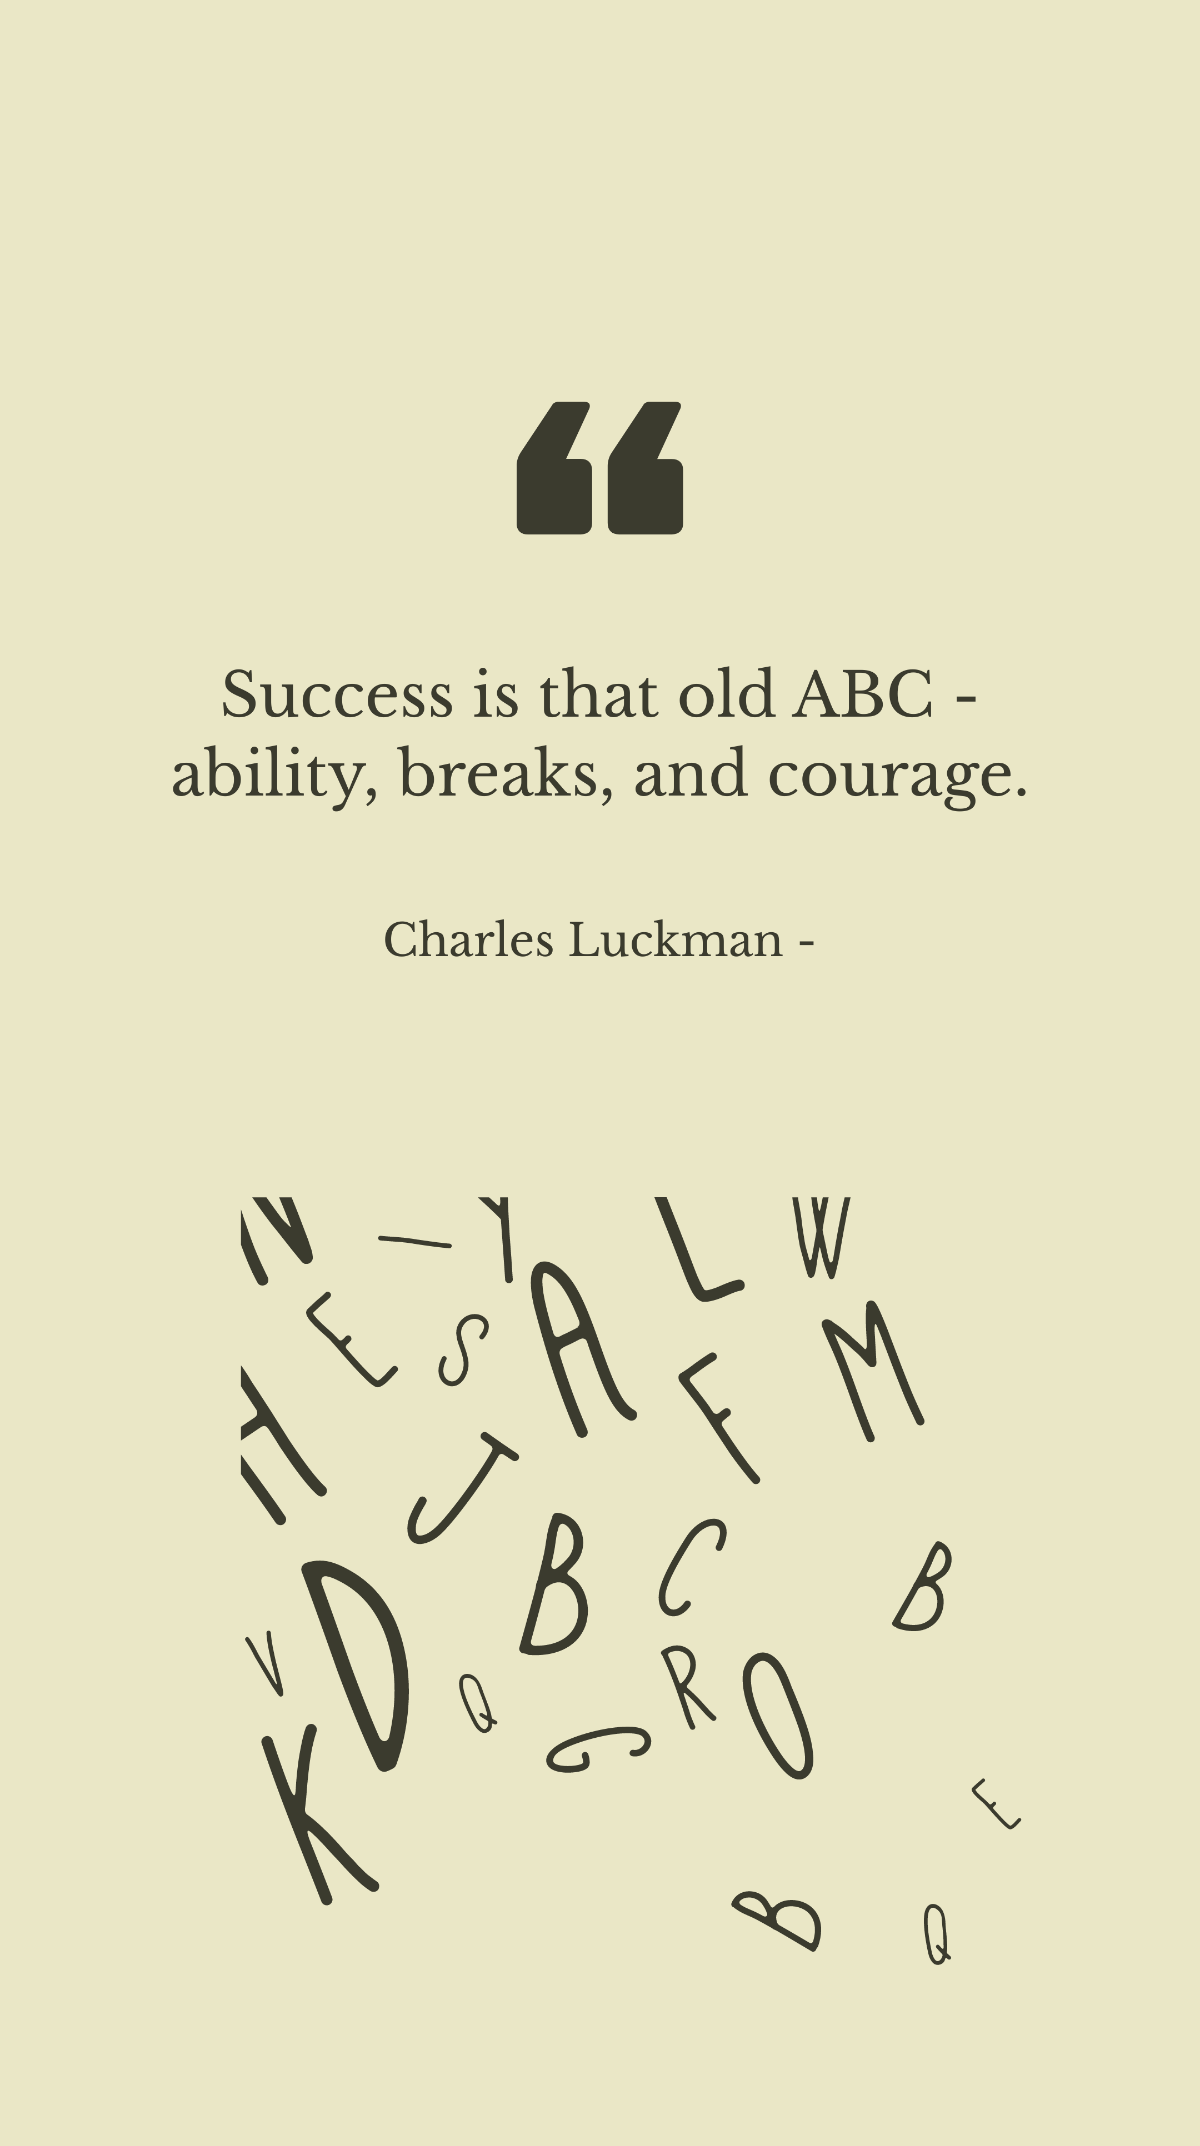 Charles Luckman - Success is that old ABC - ability, breaks, and courage.